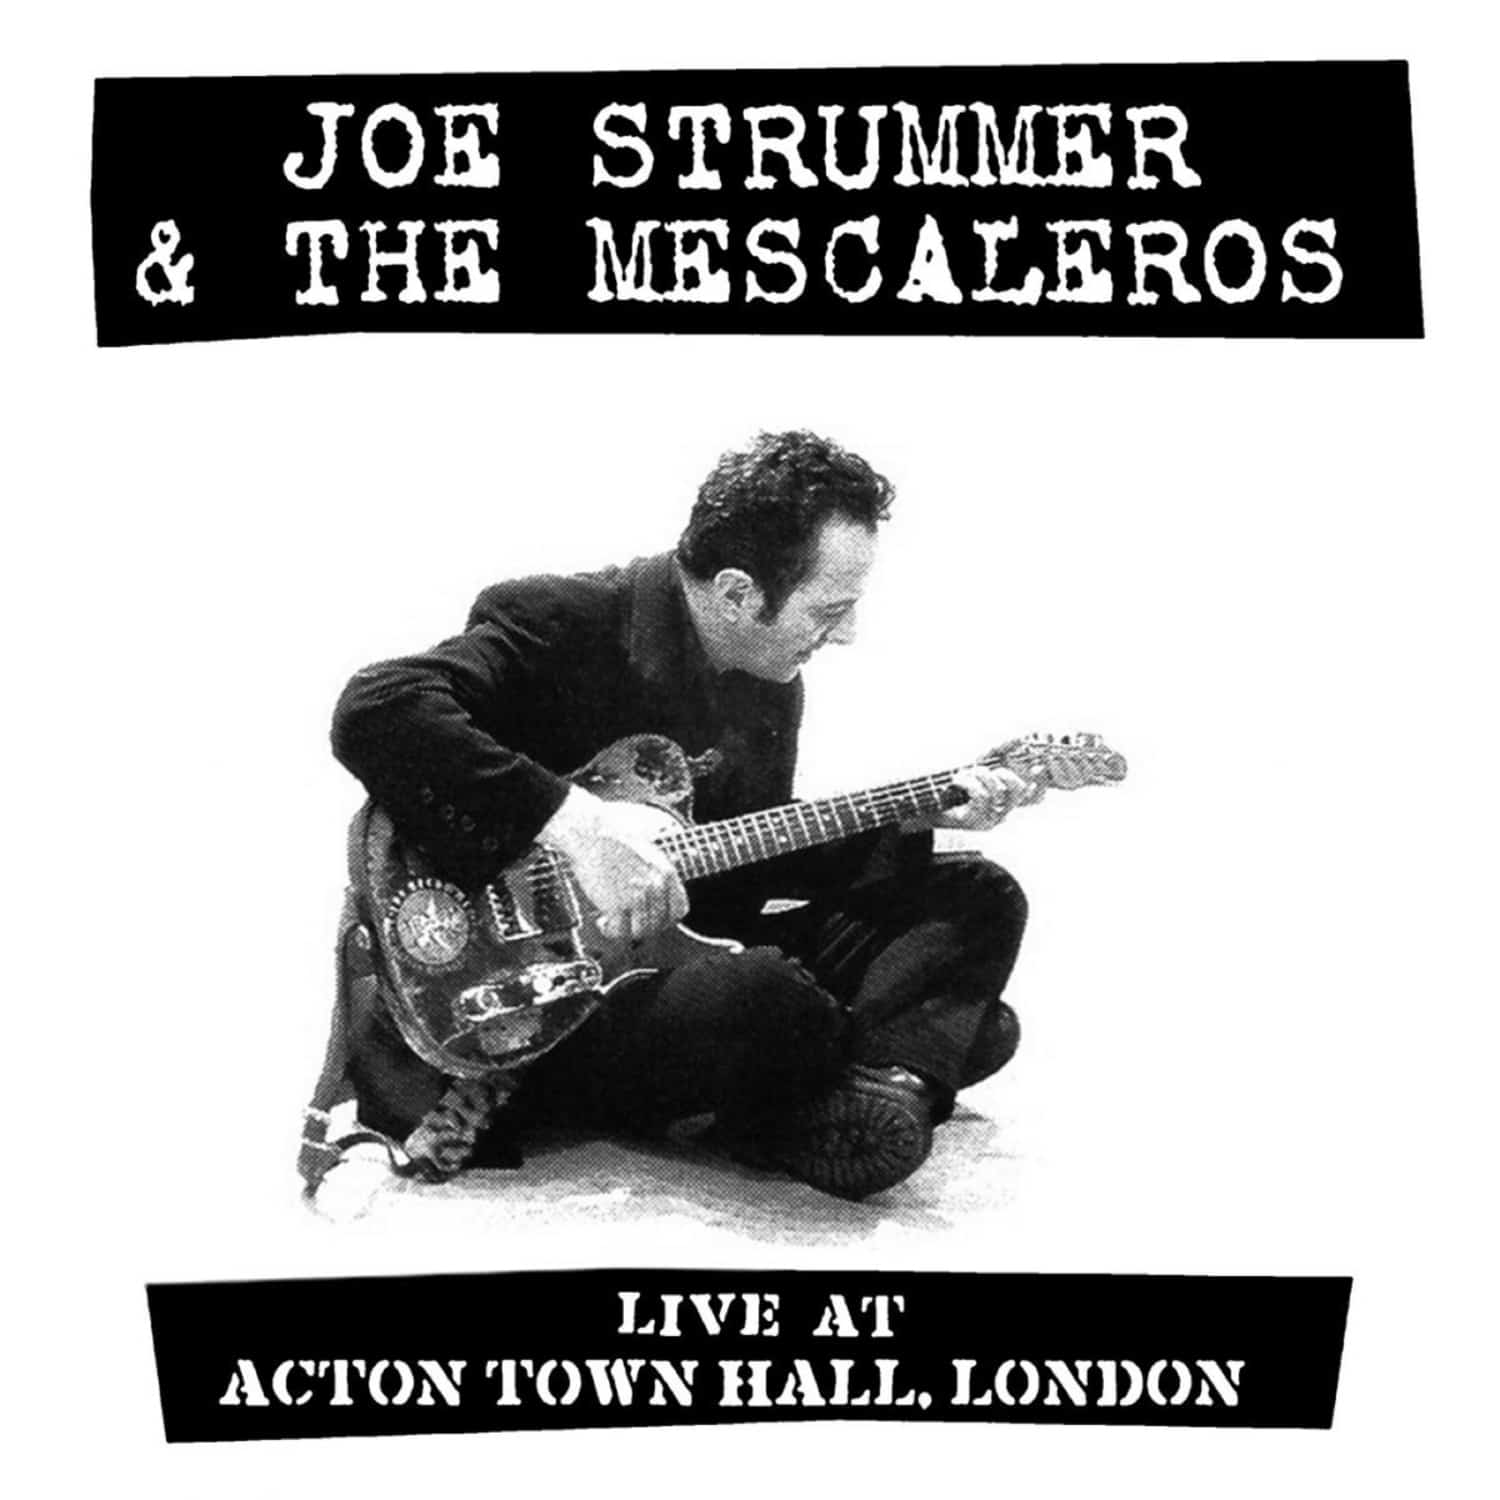 Joe Strummer & The Mescaleros - LIVE AT ACTON TOWN HALL 